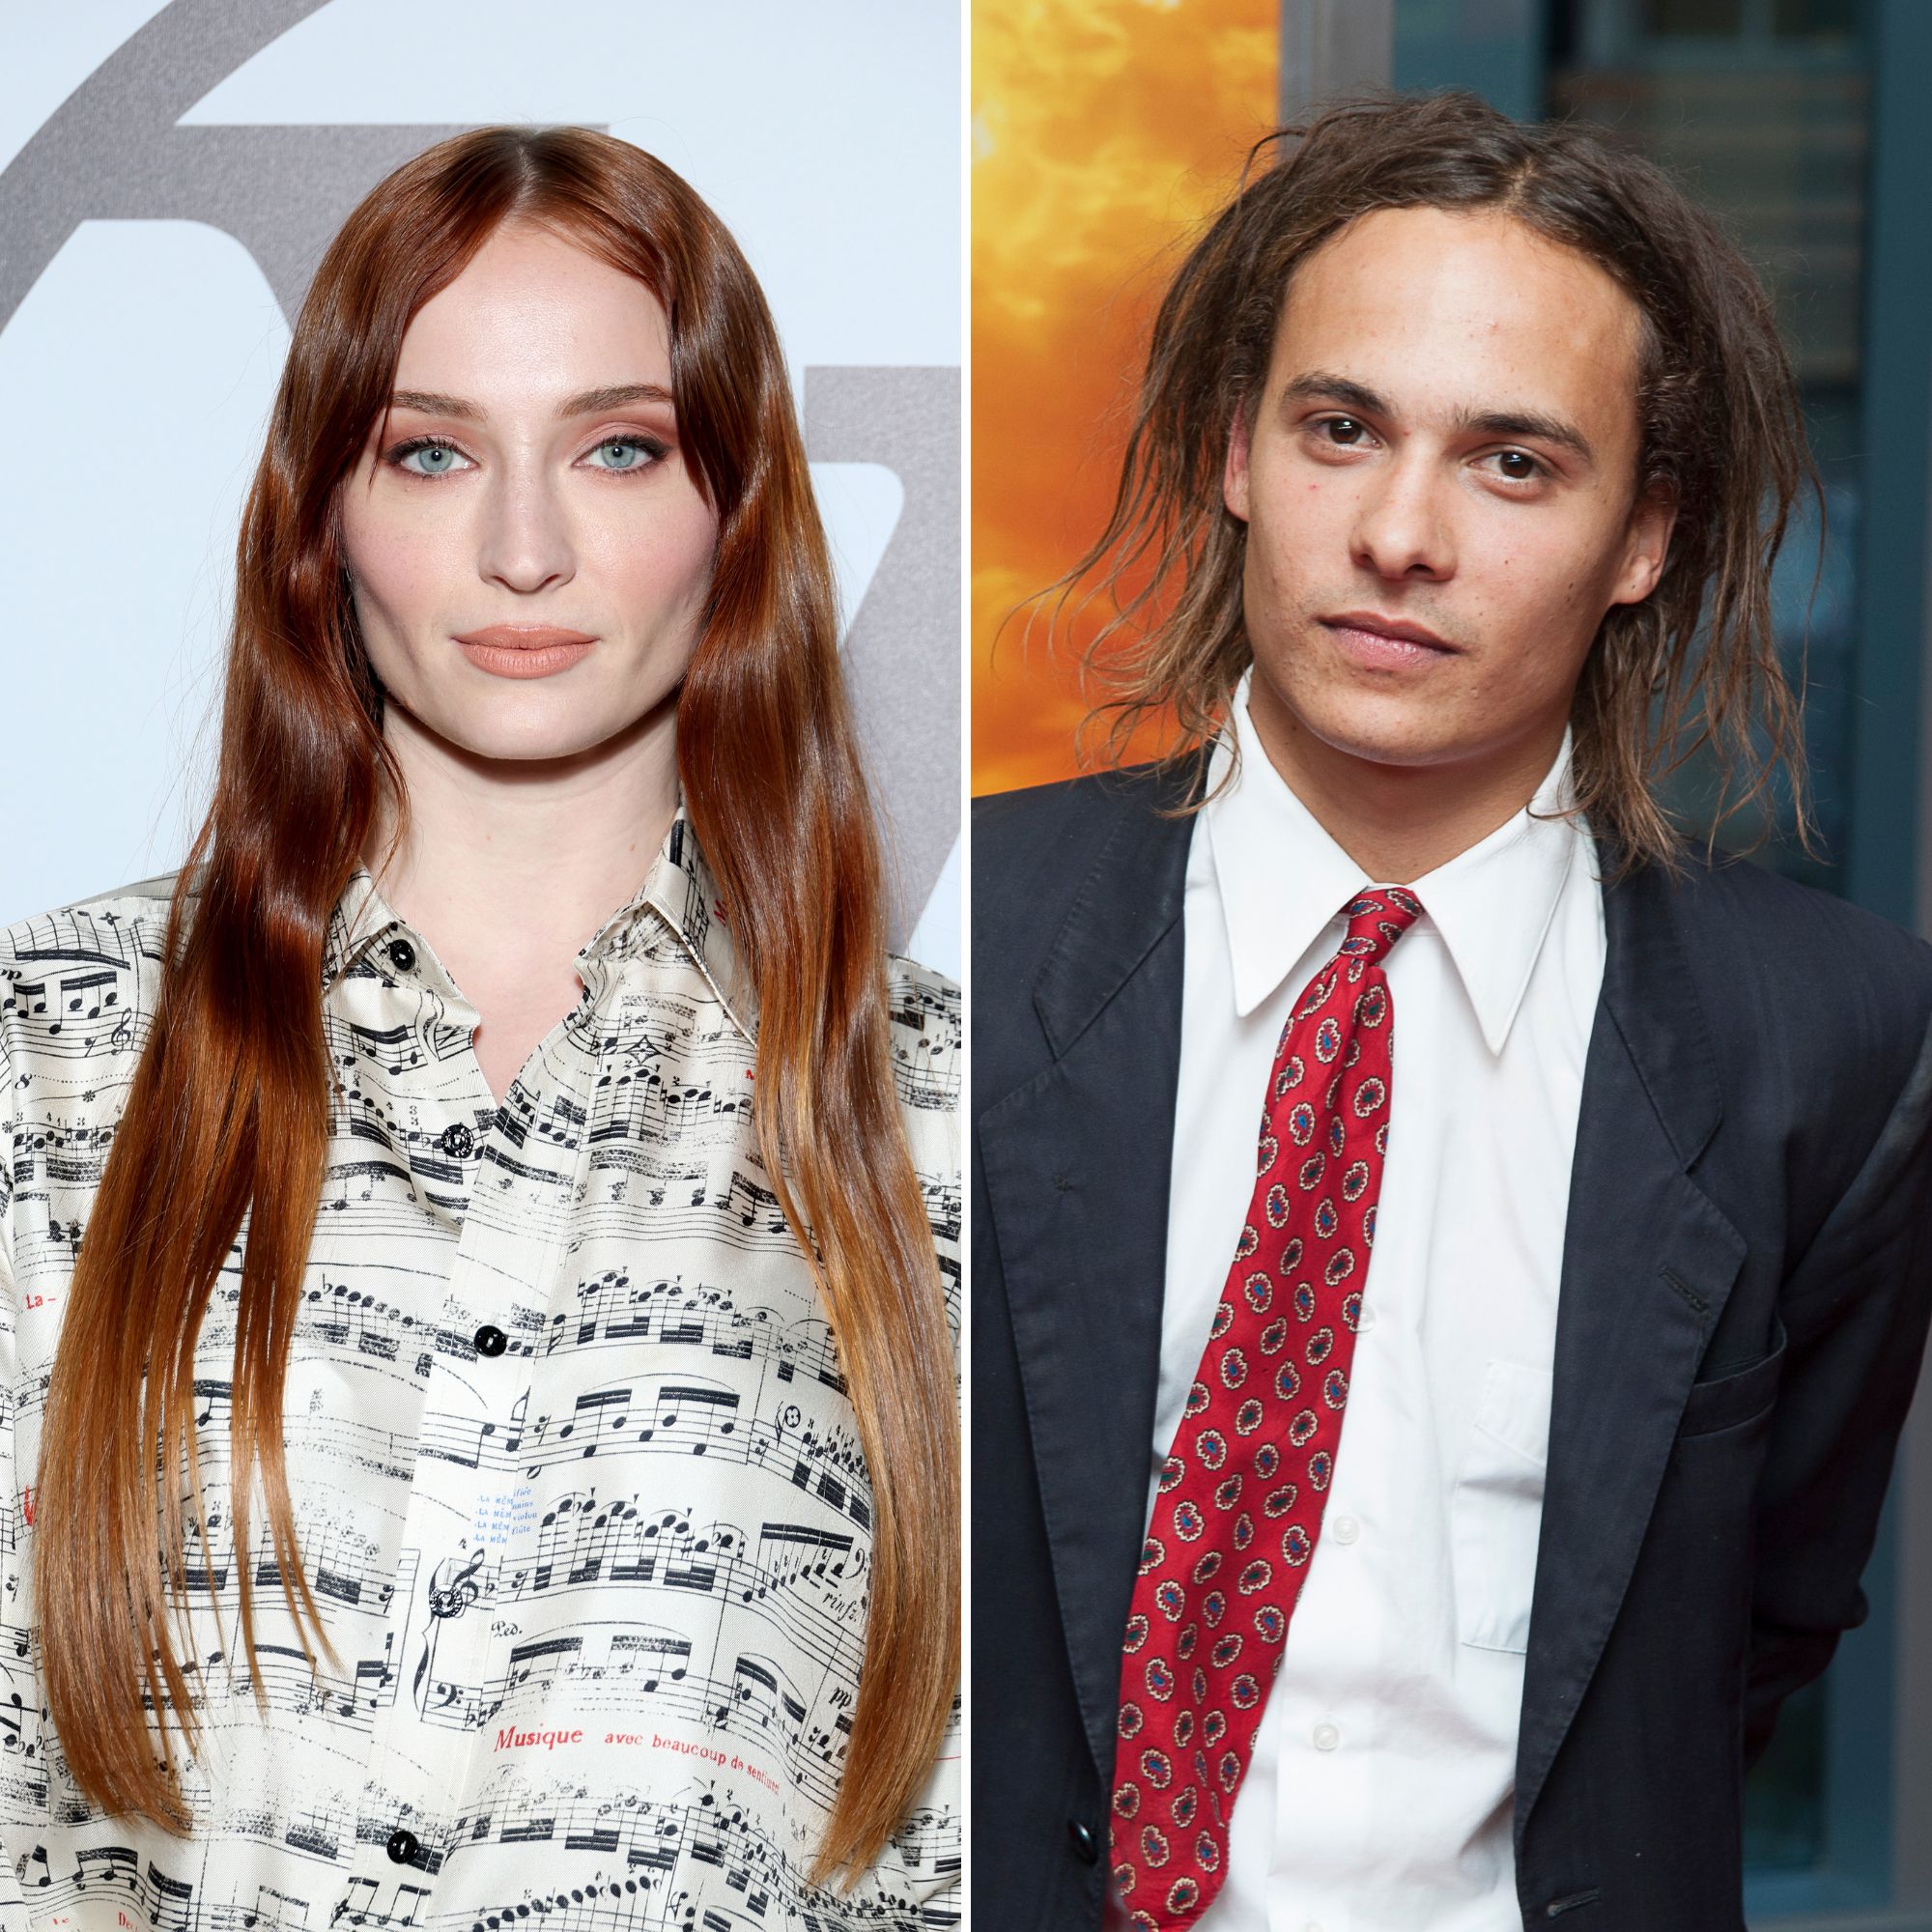 Are Sophie Turner and Frank Dillane Dating? Inside Romance Rumors